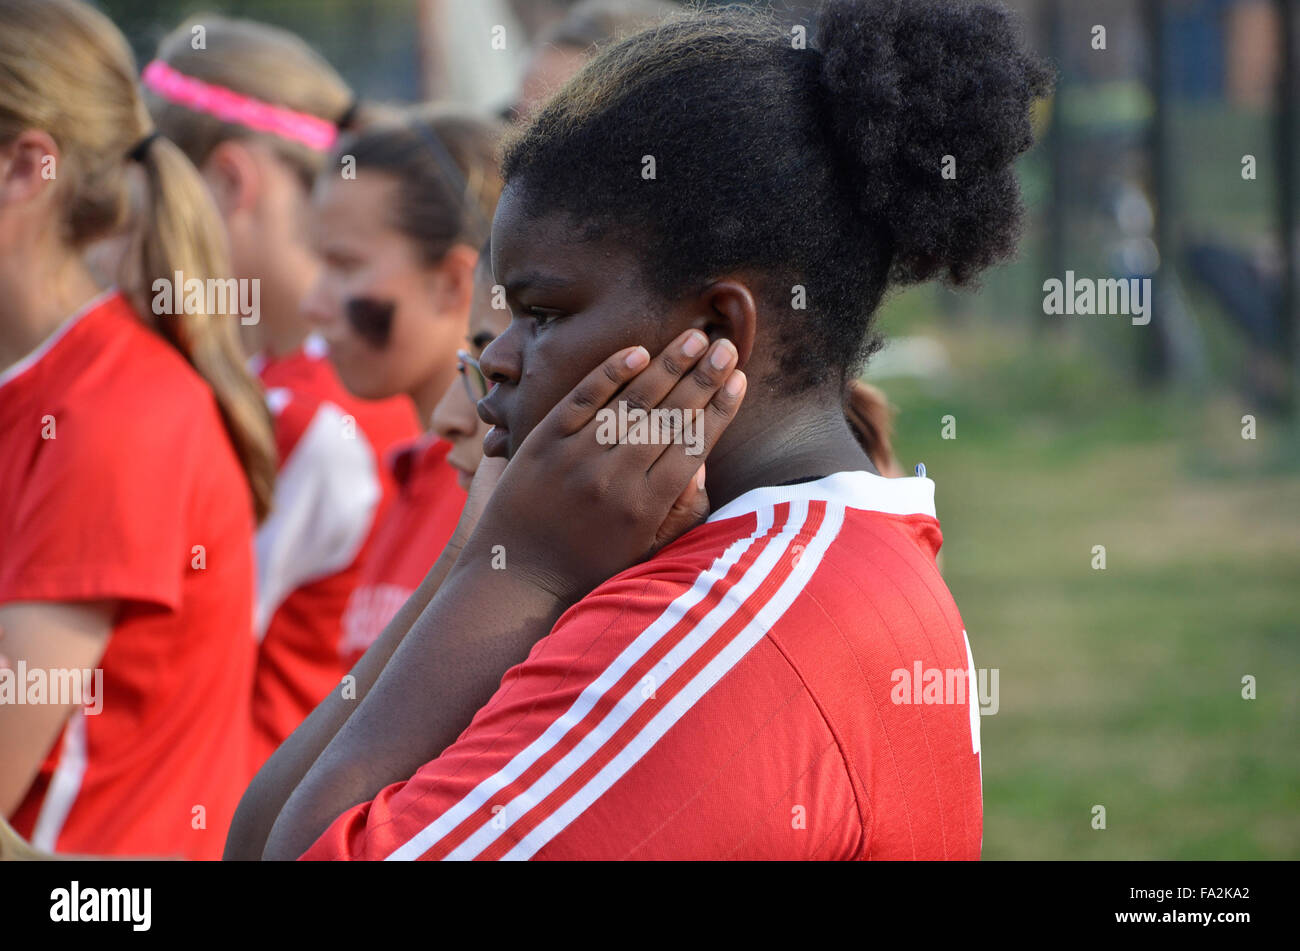 Soccer team player shows her concern over the way the game is going Stock Photo